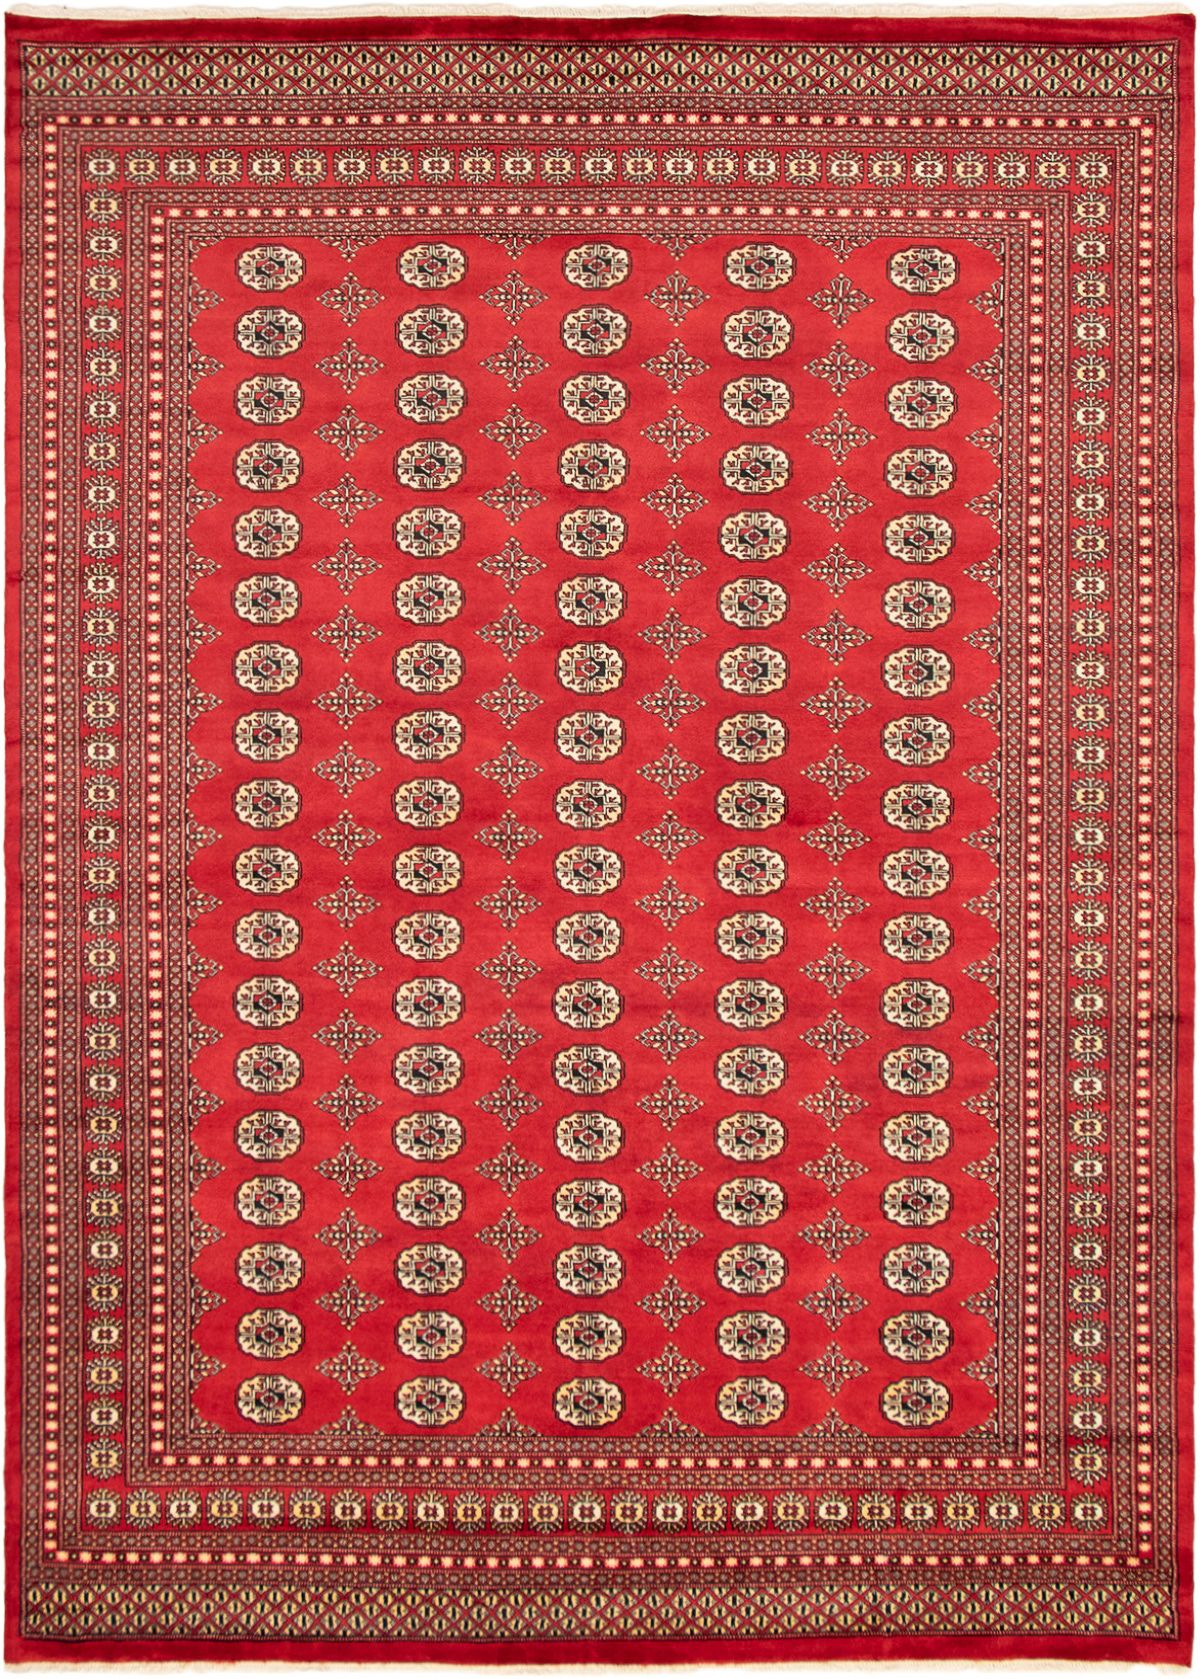 Hand-knotted Finest Peshawar Bokhara Red Wool Rug 9'11" x 13'1" Size: 9'11" x 13'1"  